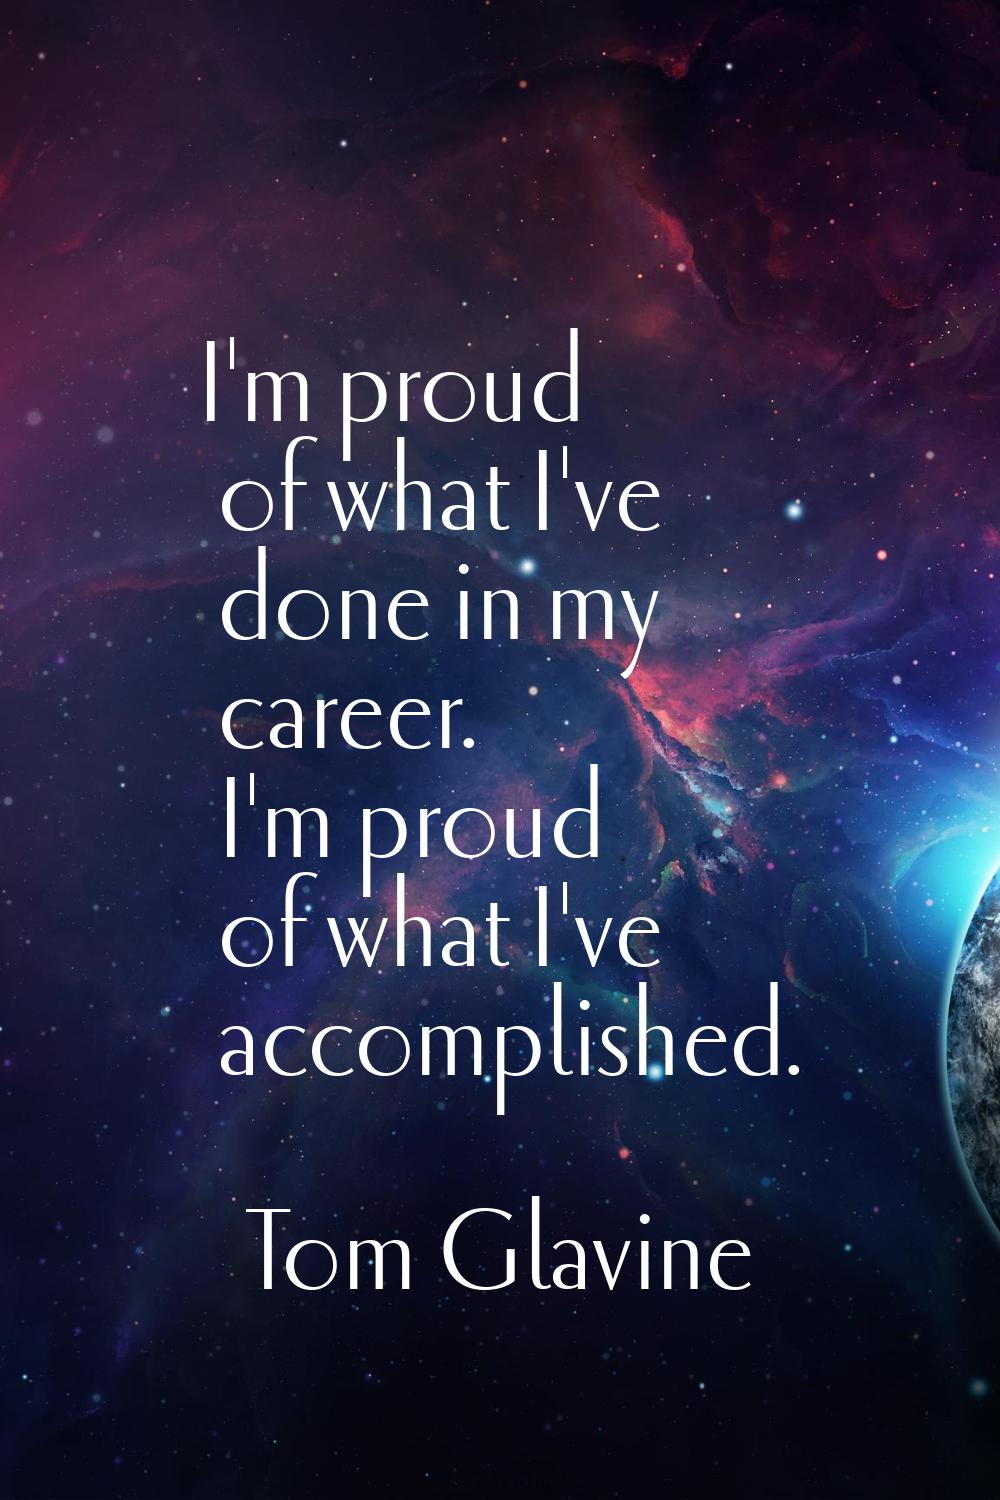 I'm proud of what I've done in my career. I'm proud of what I've accomplished.